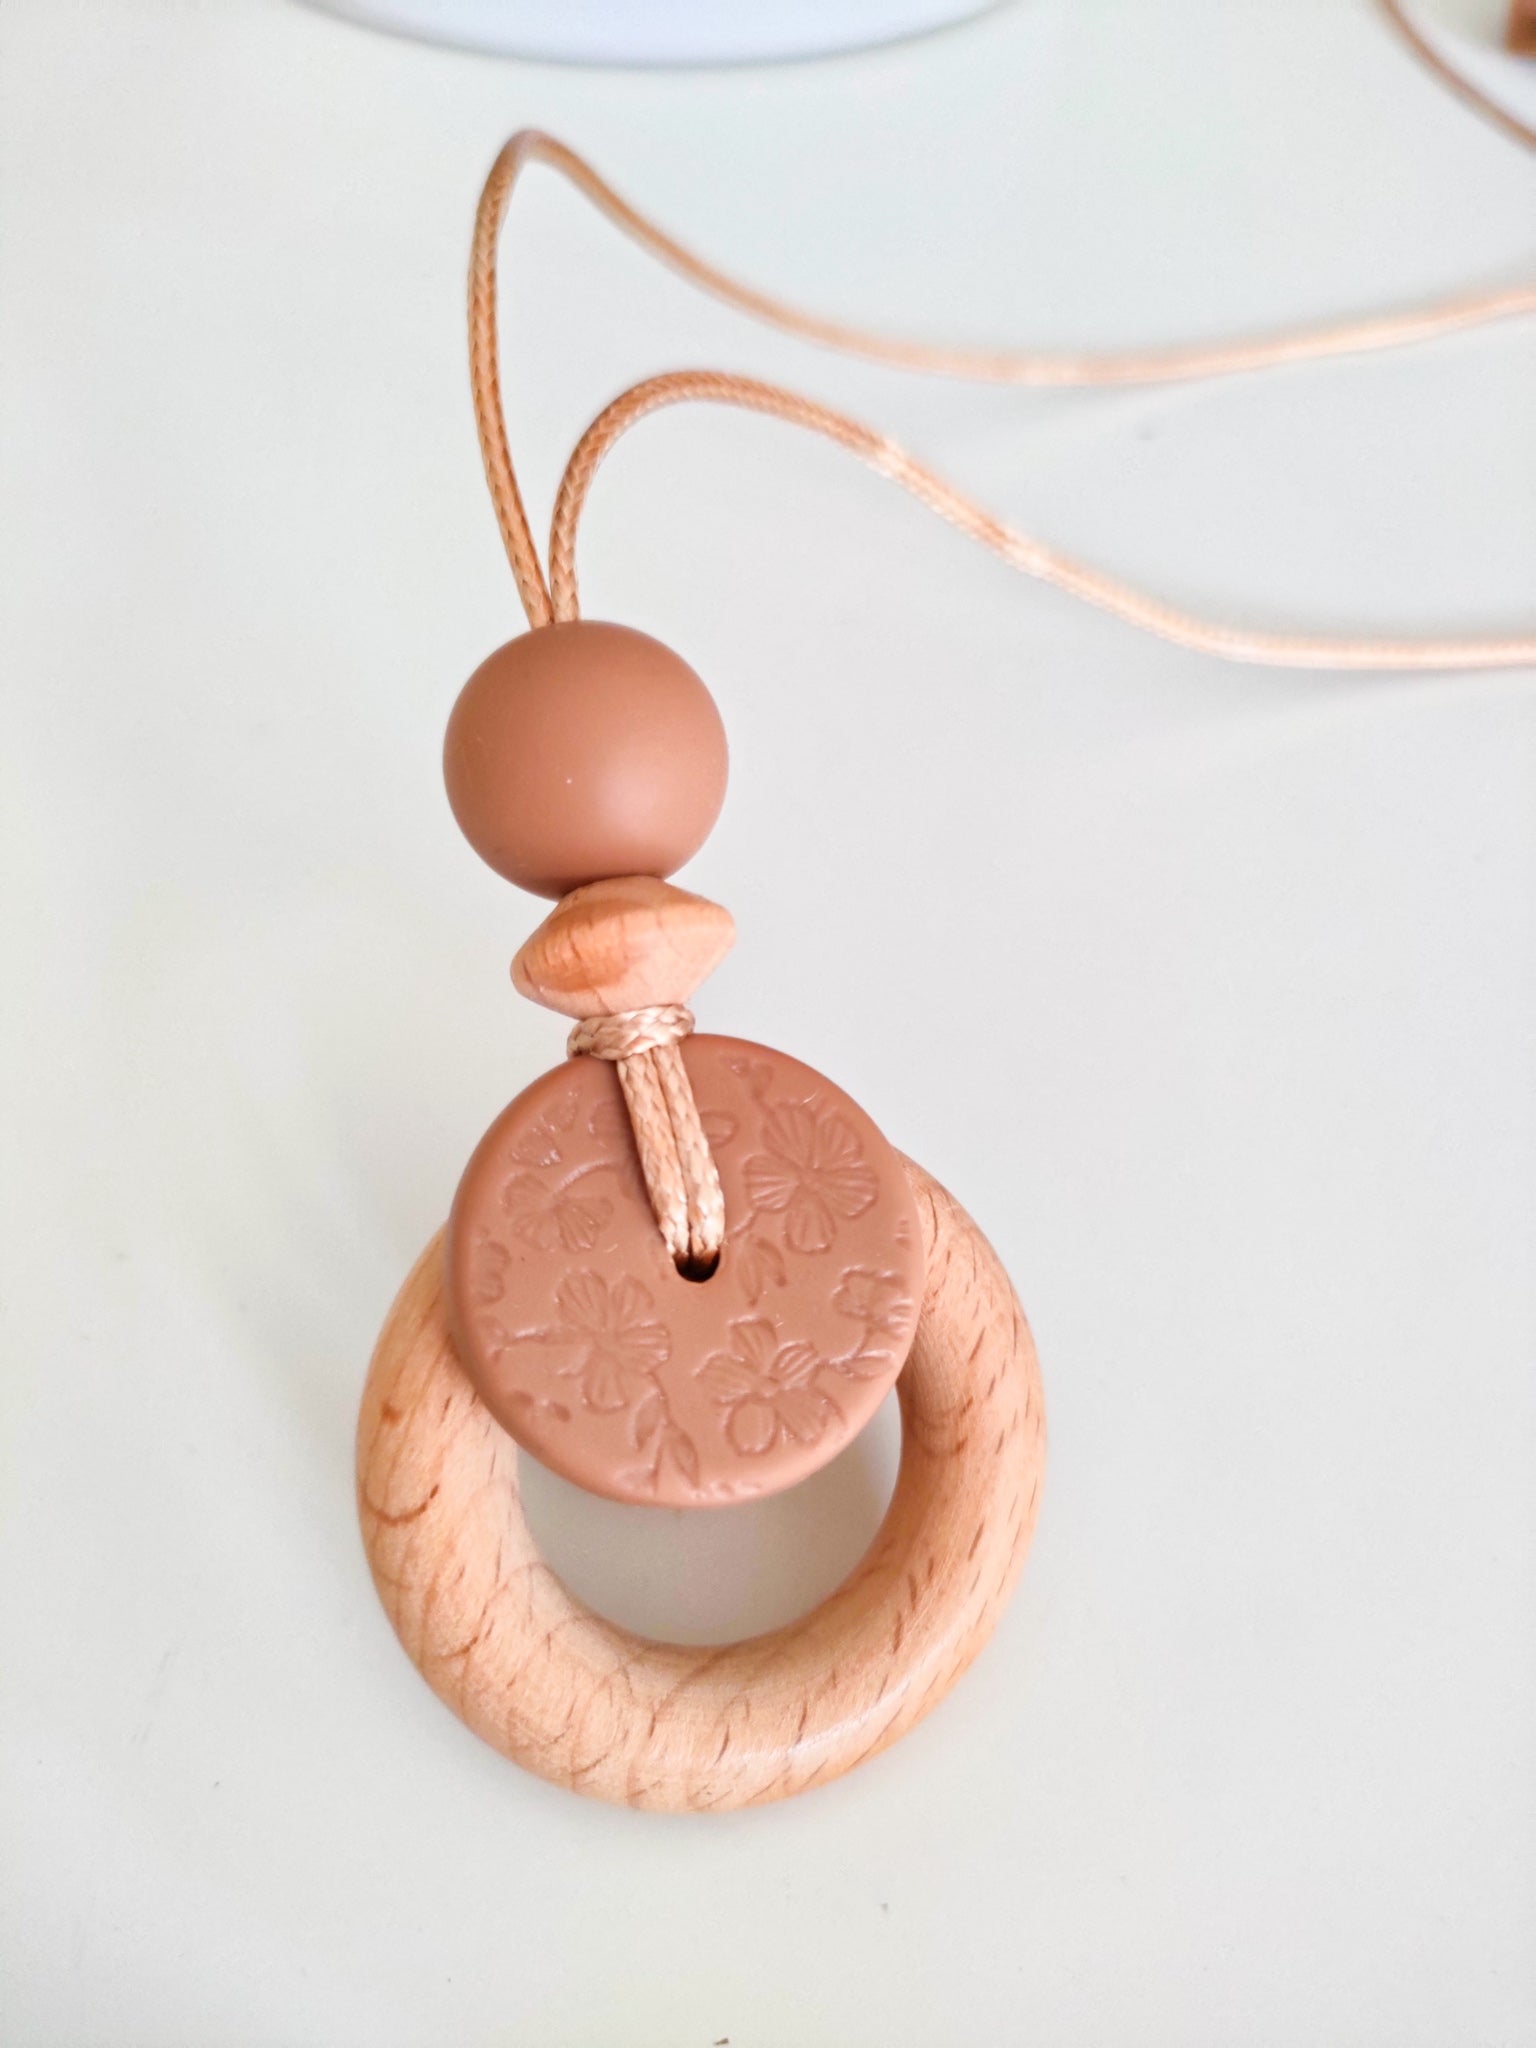 Embossed Clay Bloom Pendant - Bennie Blooms Breastfeeding, Teething and Fiddle Jewellery at its finest.